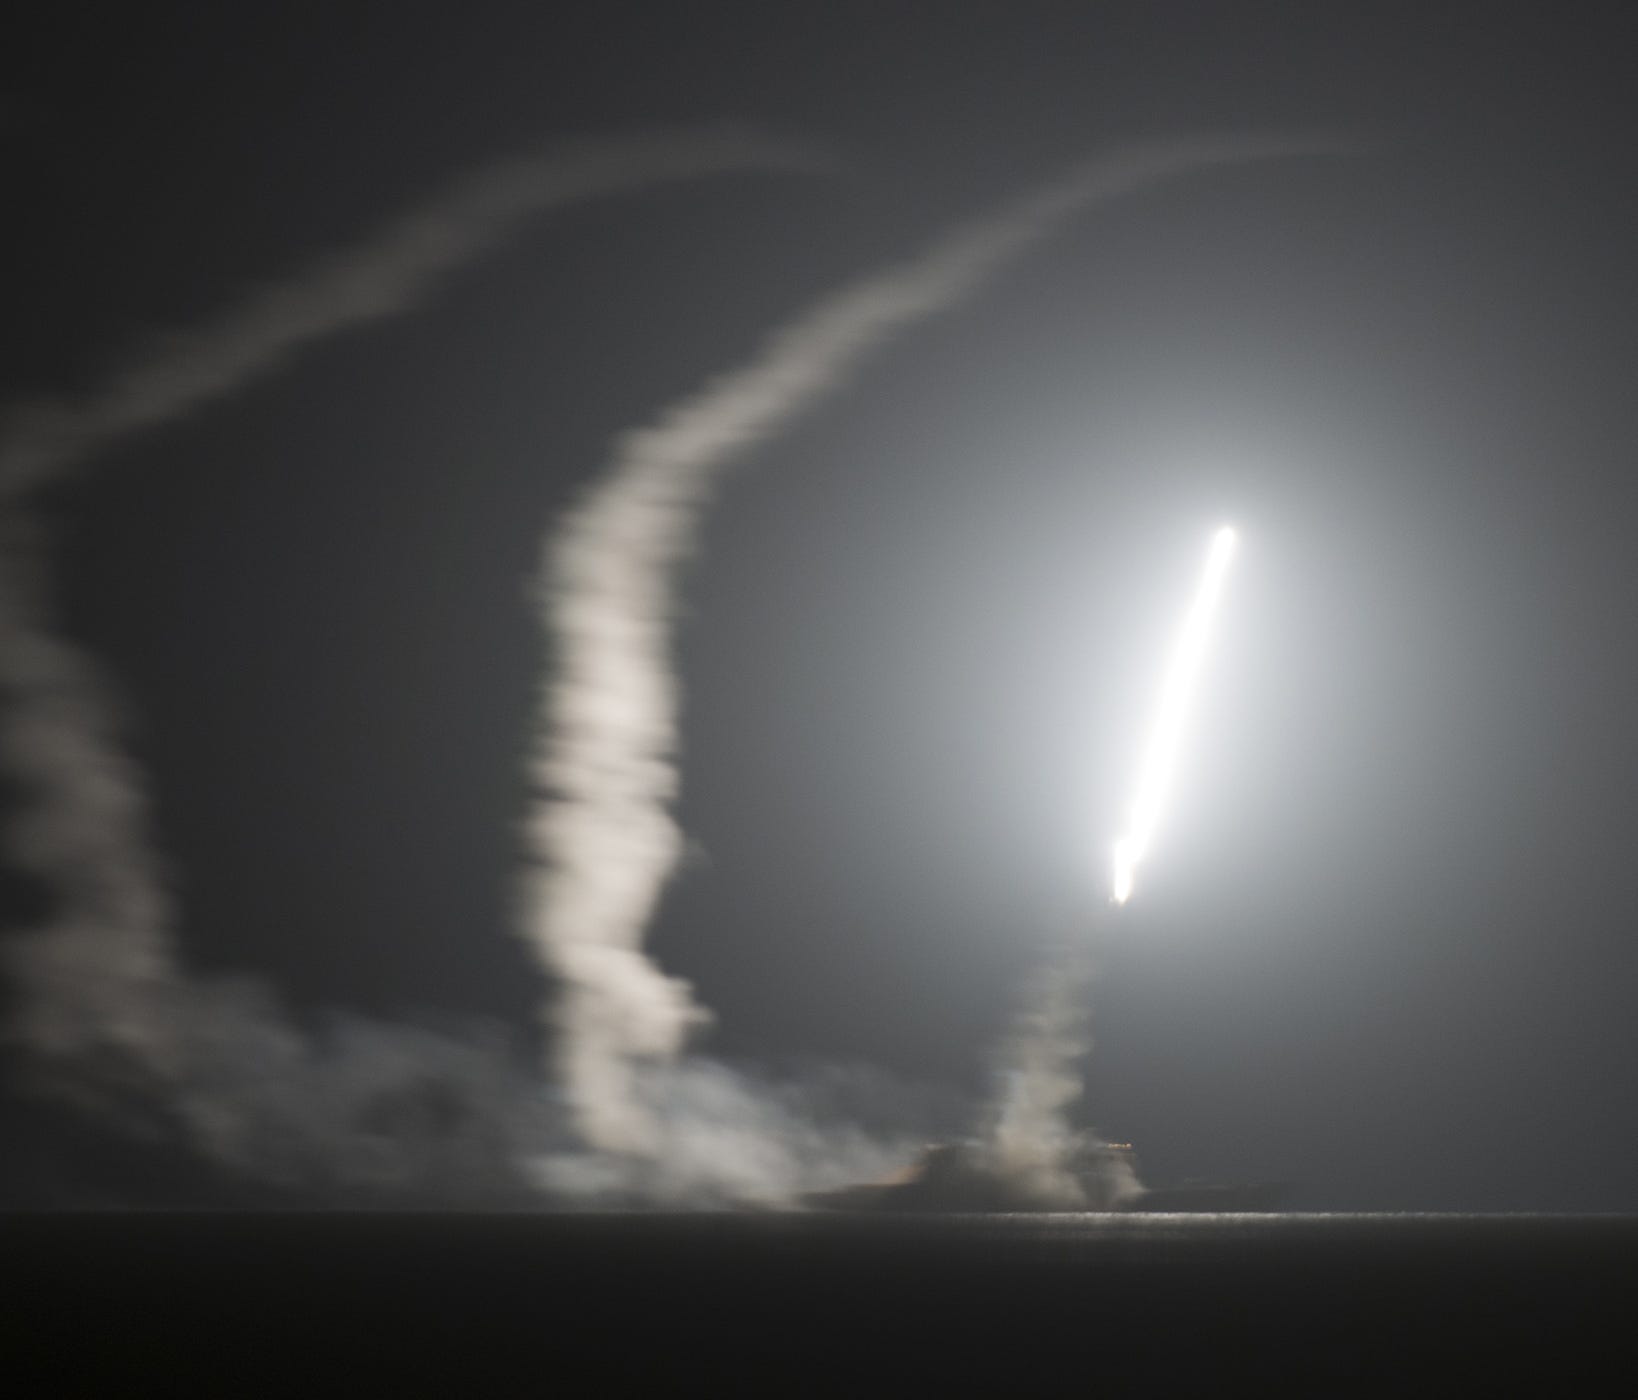 A Tomahawk cruise missile launches off a U.S. destroyer.